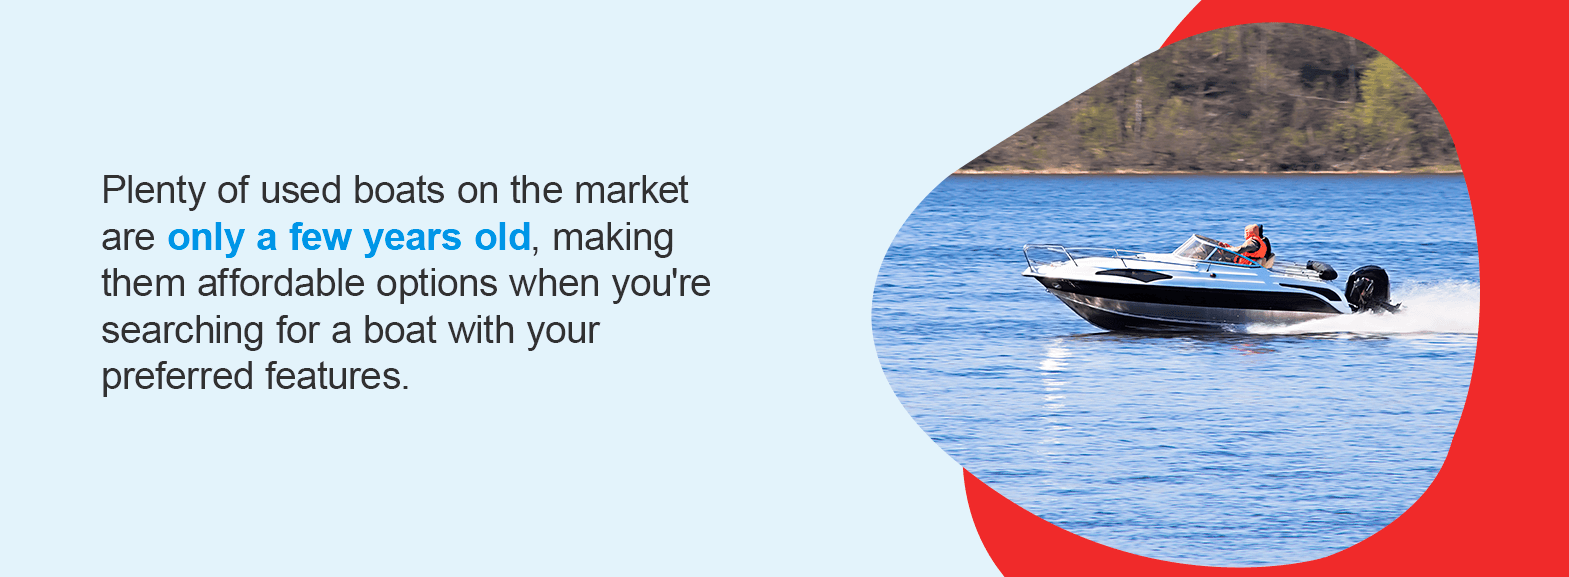 The Advantages of Buying a Used Boat. Plenty of used boats on the market are only a few years old, making them affordable options when you're searching for a boat with your preferred features. 